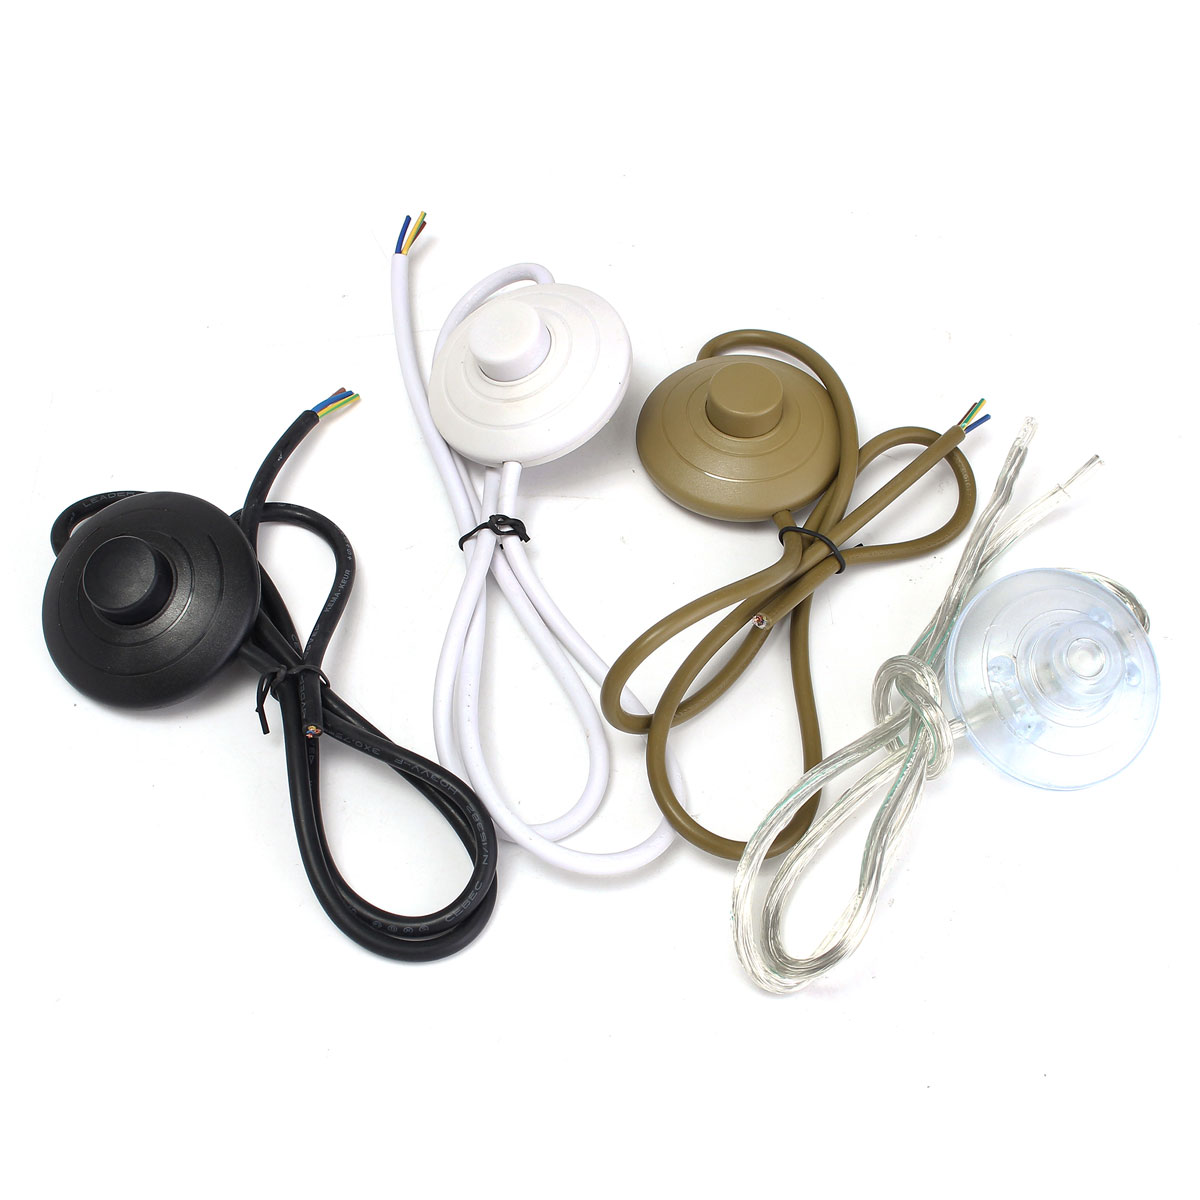 1M-Circular-Lighting-Button-Switch-with-3-Core-Inline-Flex-Cord-for-Table-Desk-Lamp-1271121